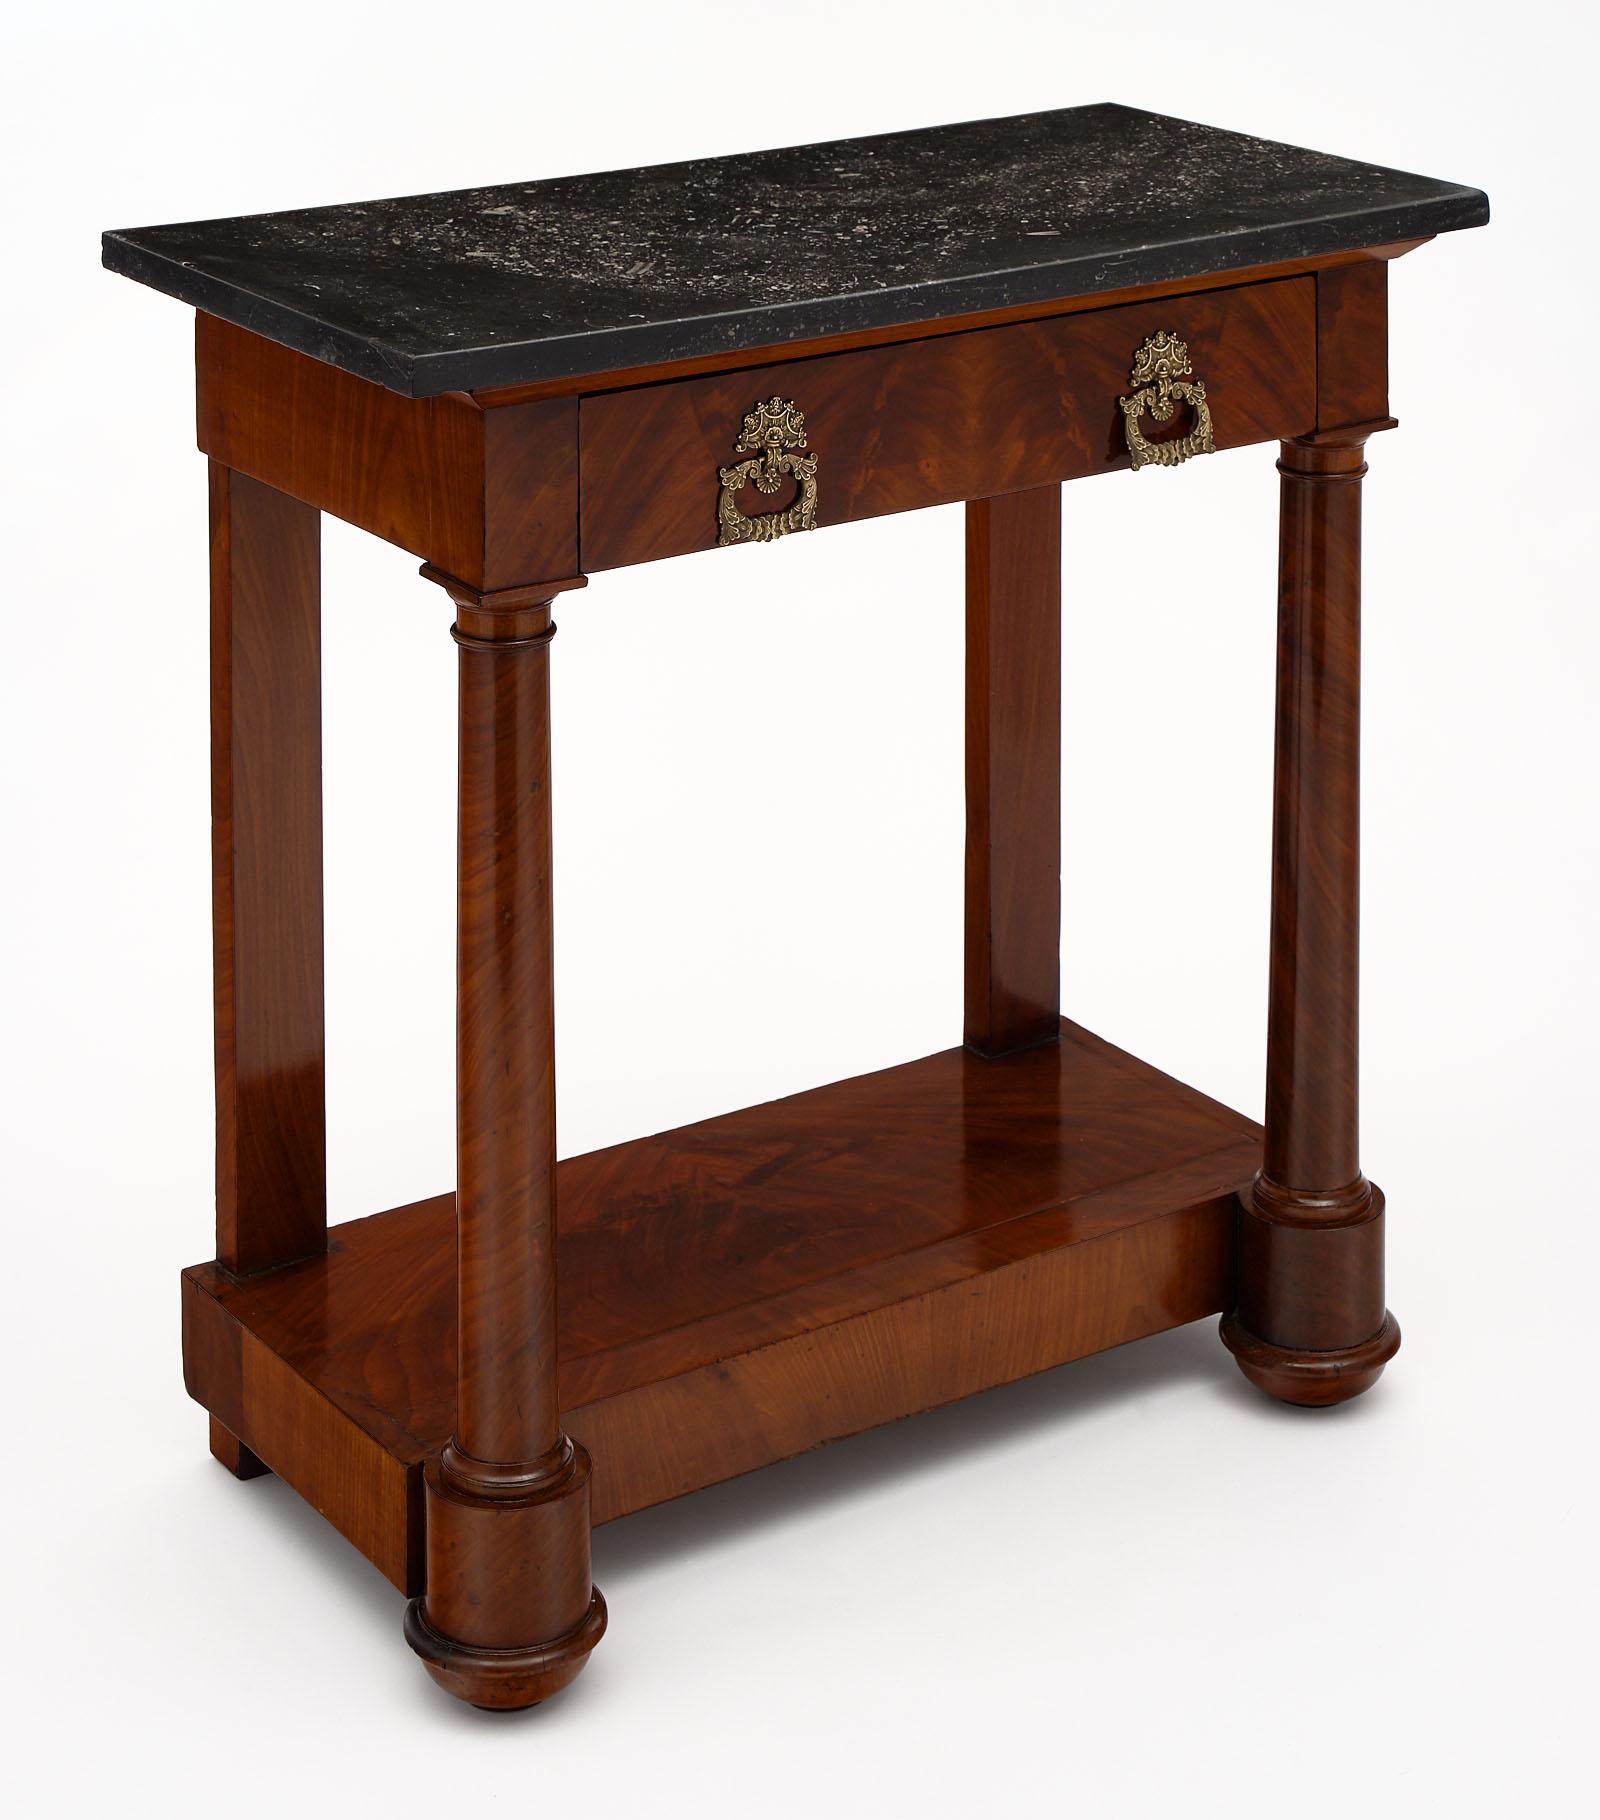 Empire period antique console table with marble top. This petite piece is made of mahogany with a black marble top. We love the finely cast bronze hardware as well!